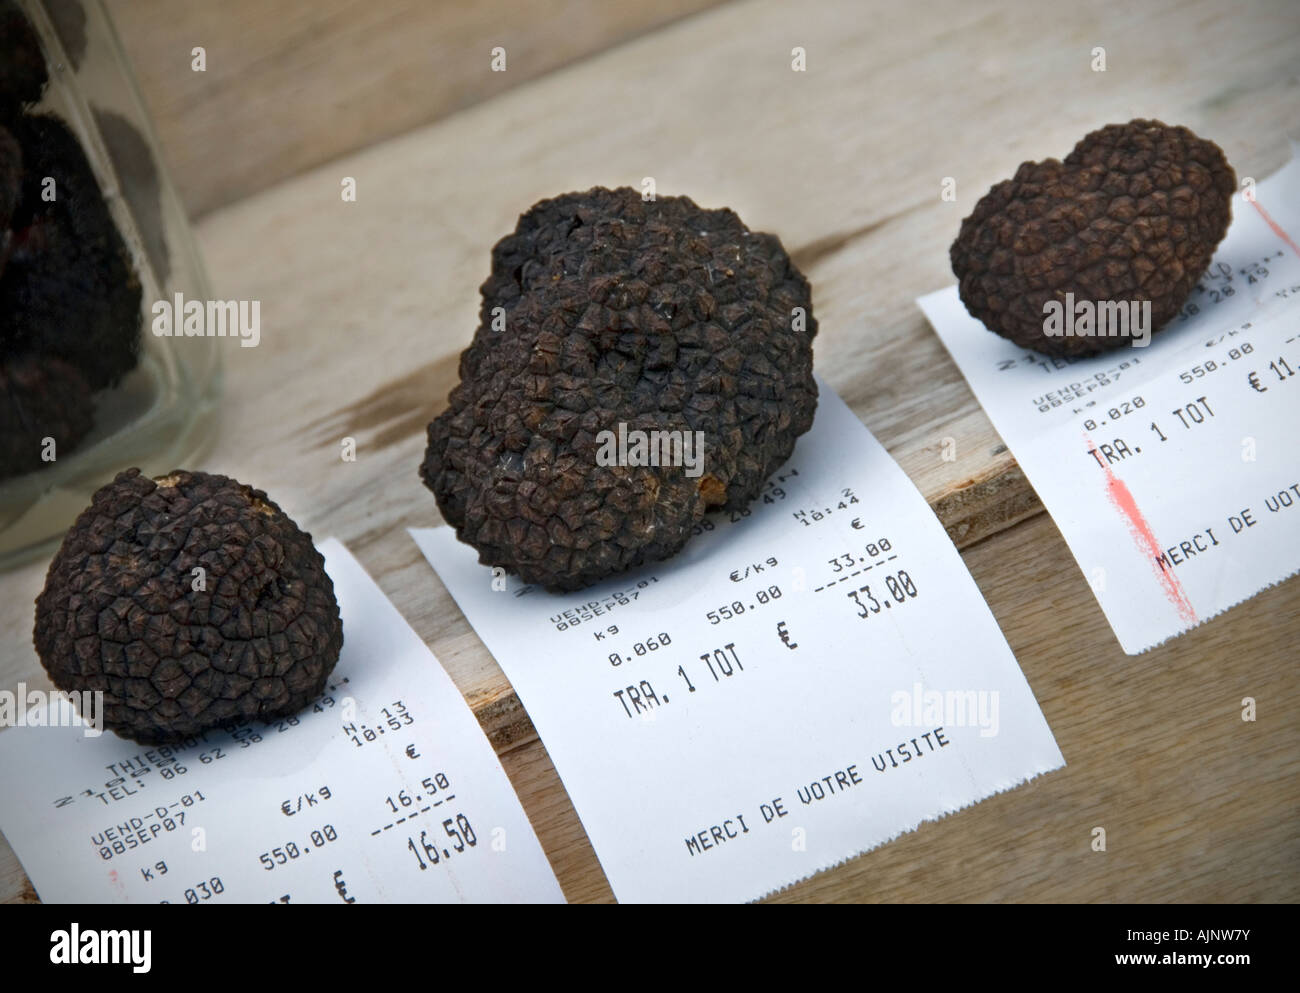 French black truffles on sale with euros till price tickets, in Beaune central market, Cote d'Or Burgundy France Stock Photo